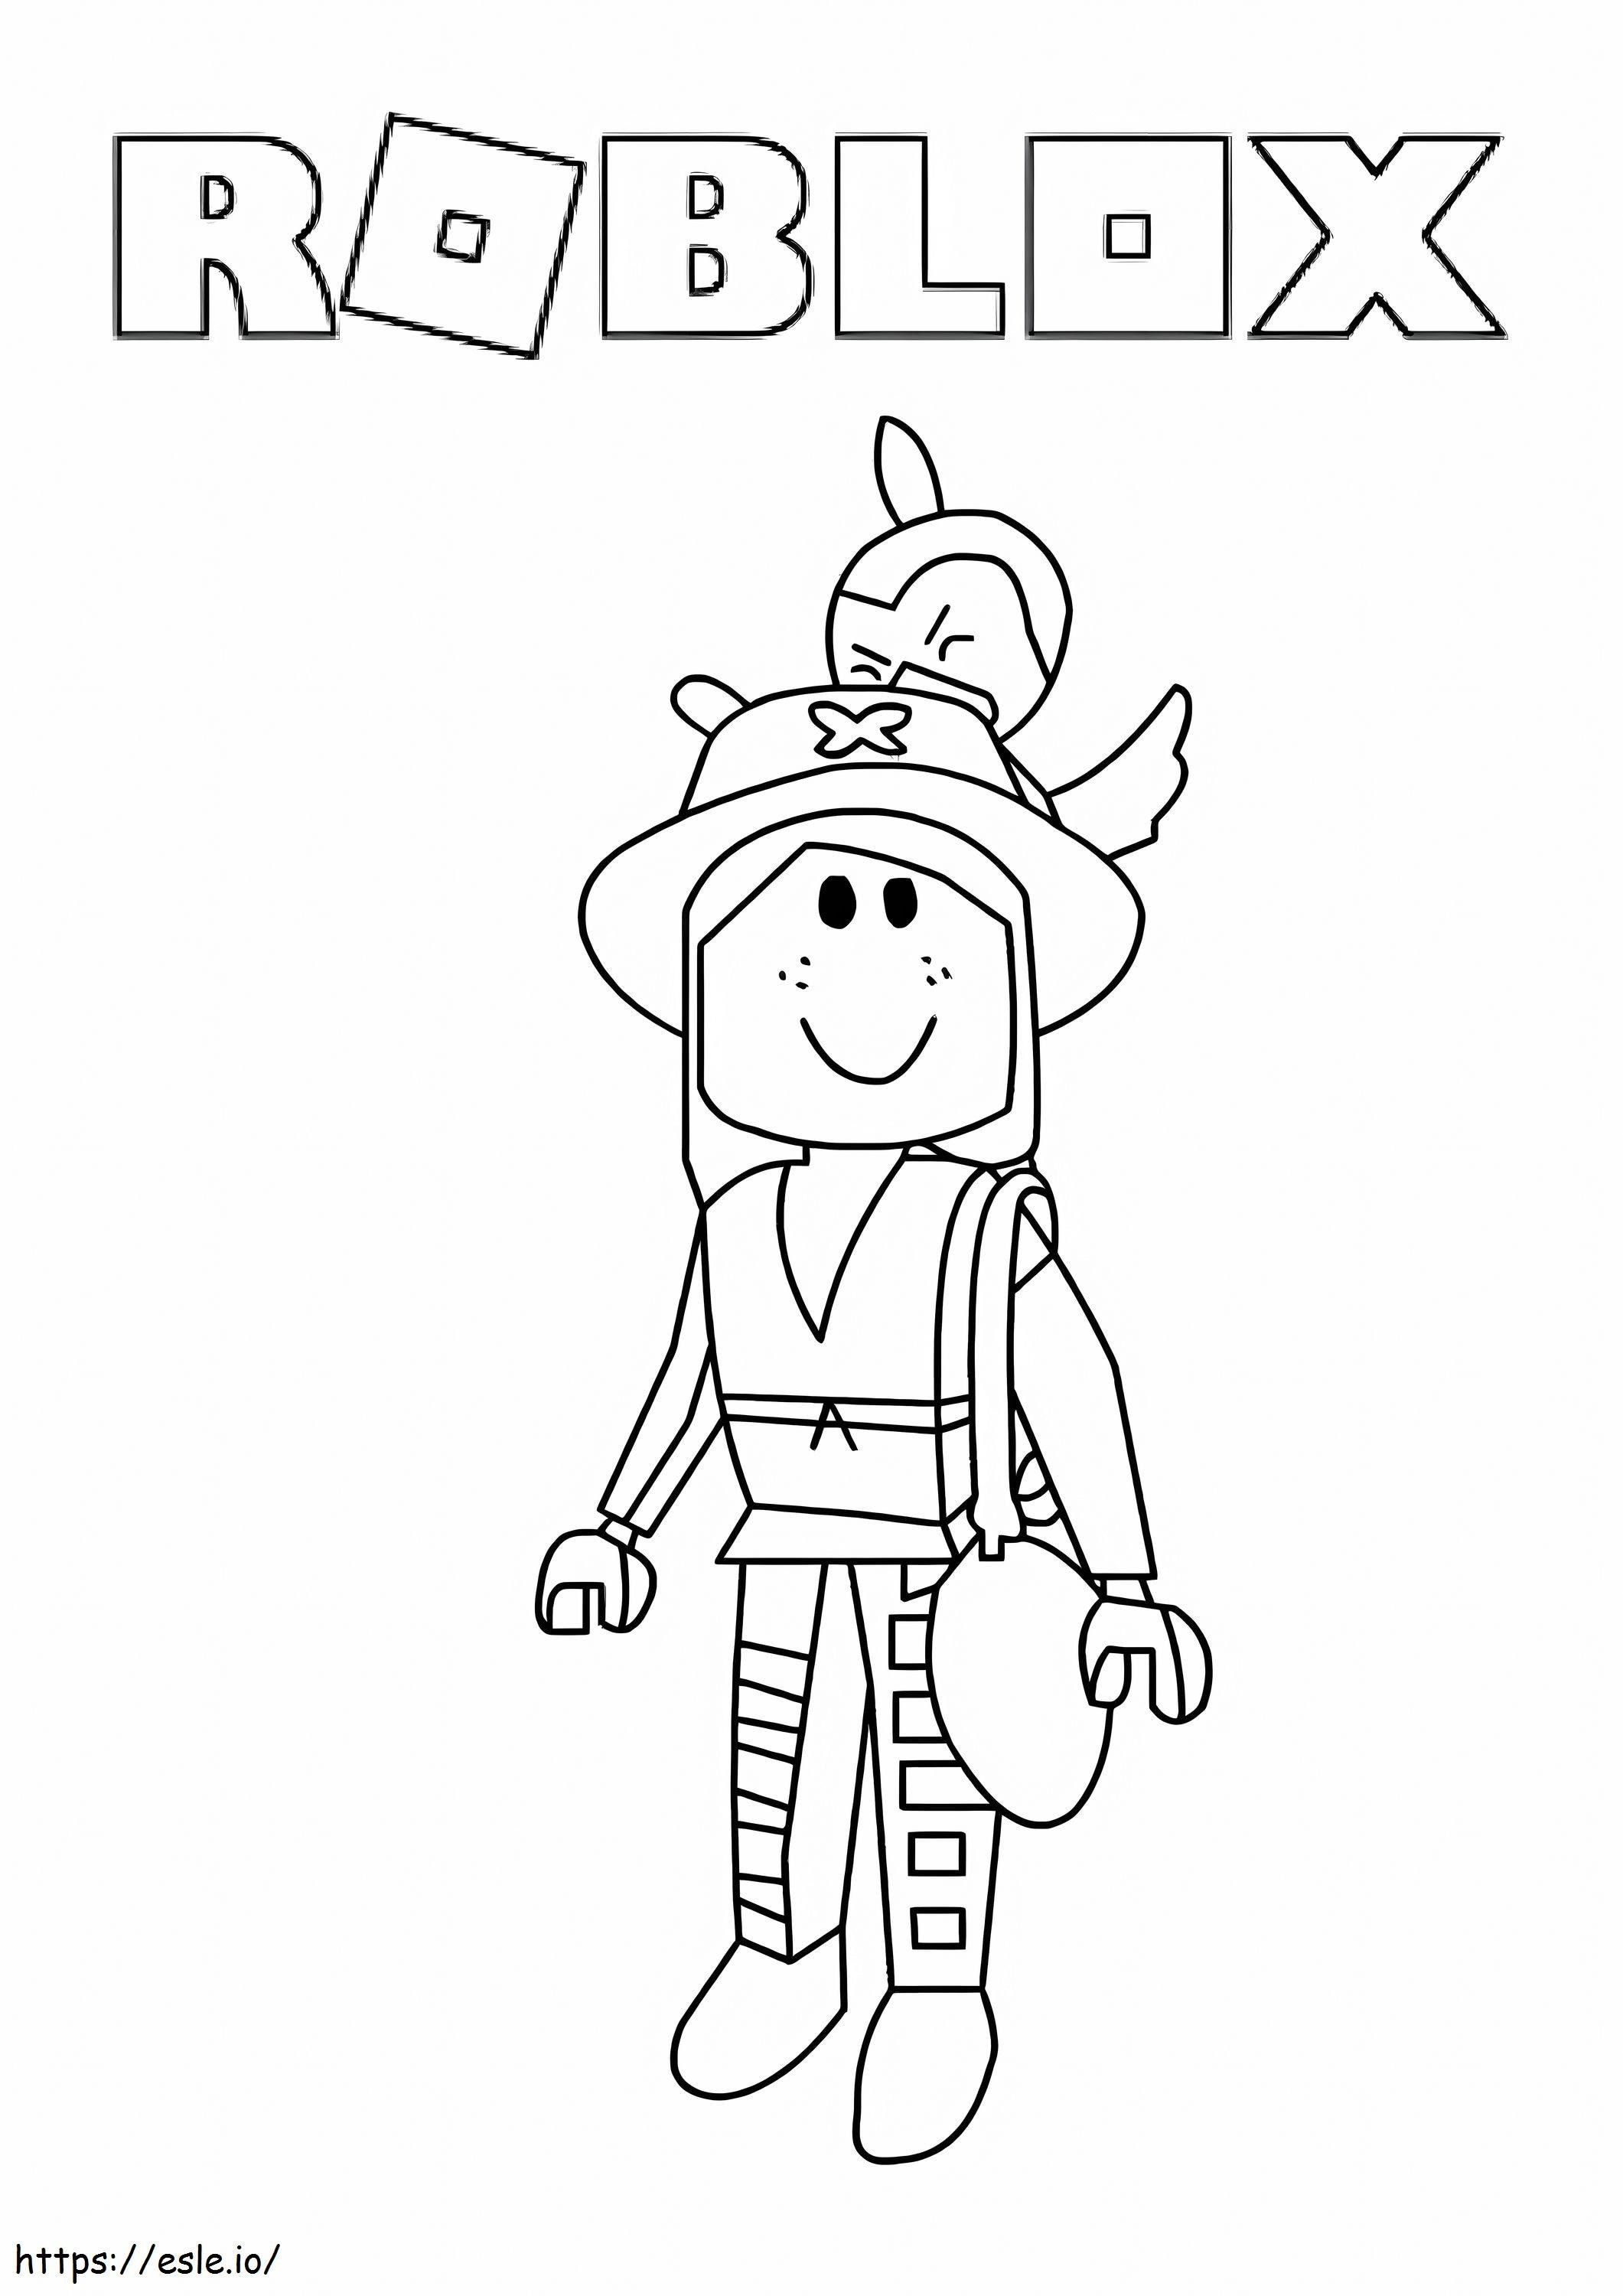 Roblox Smiling Girl coloring page